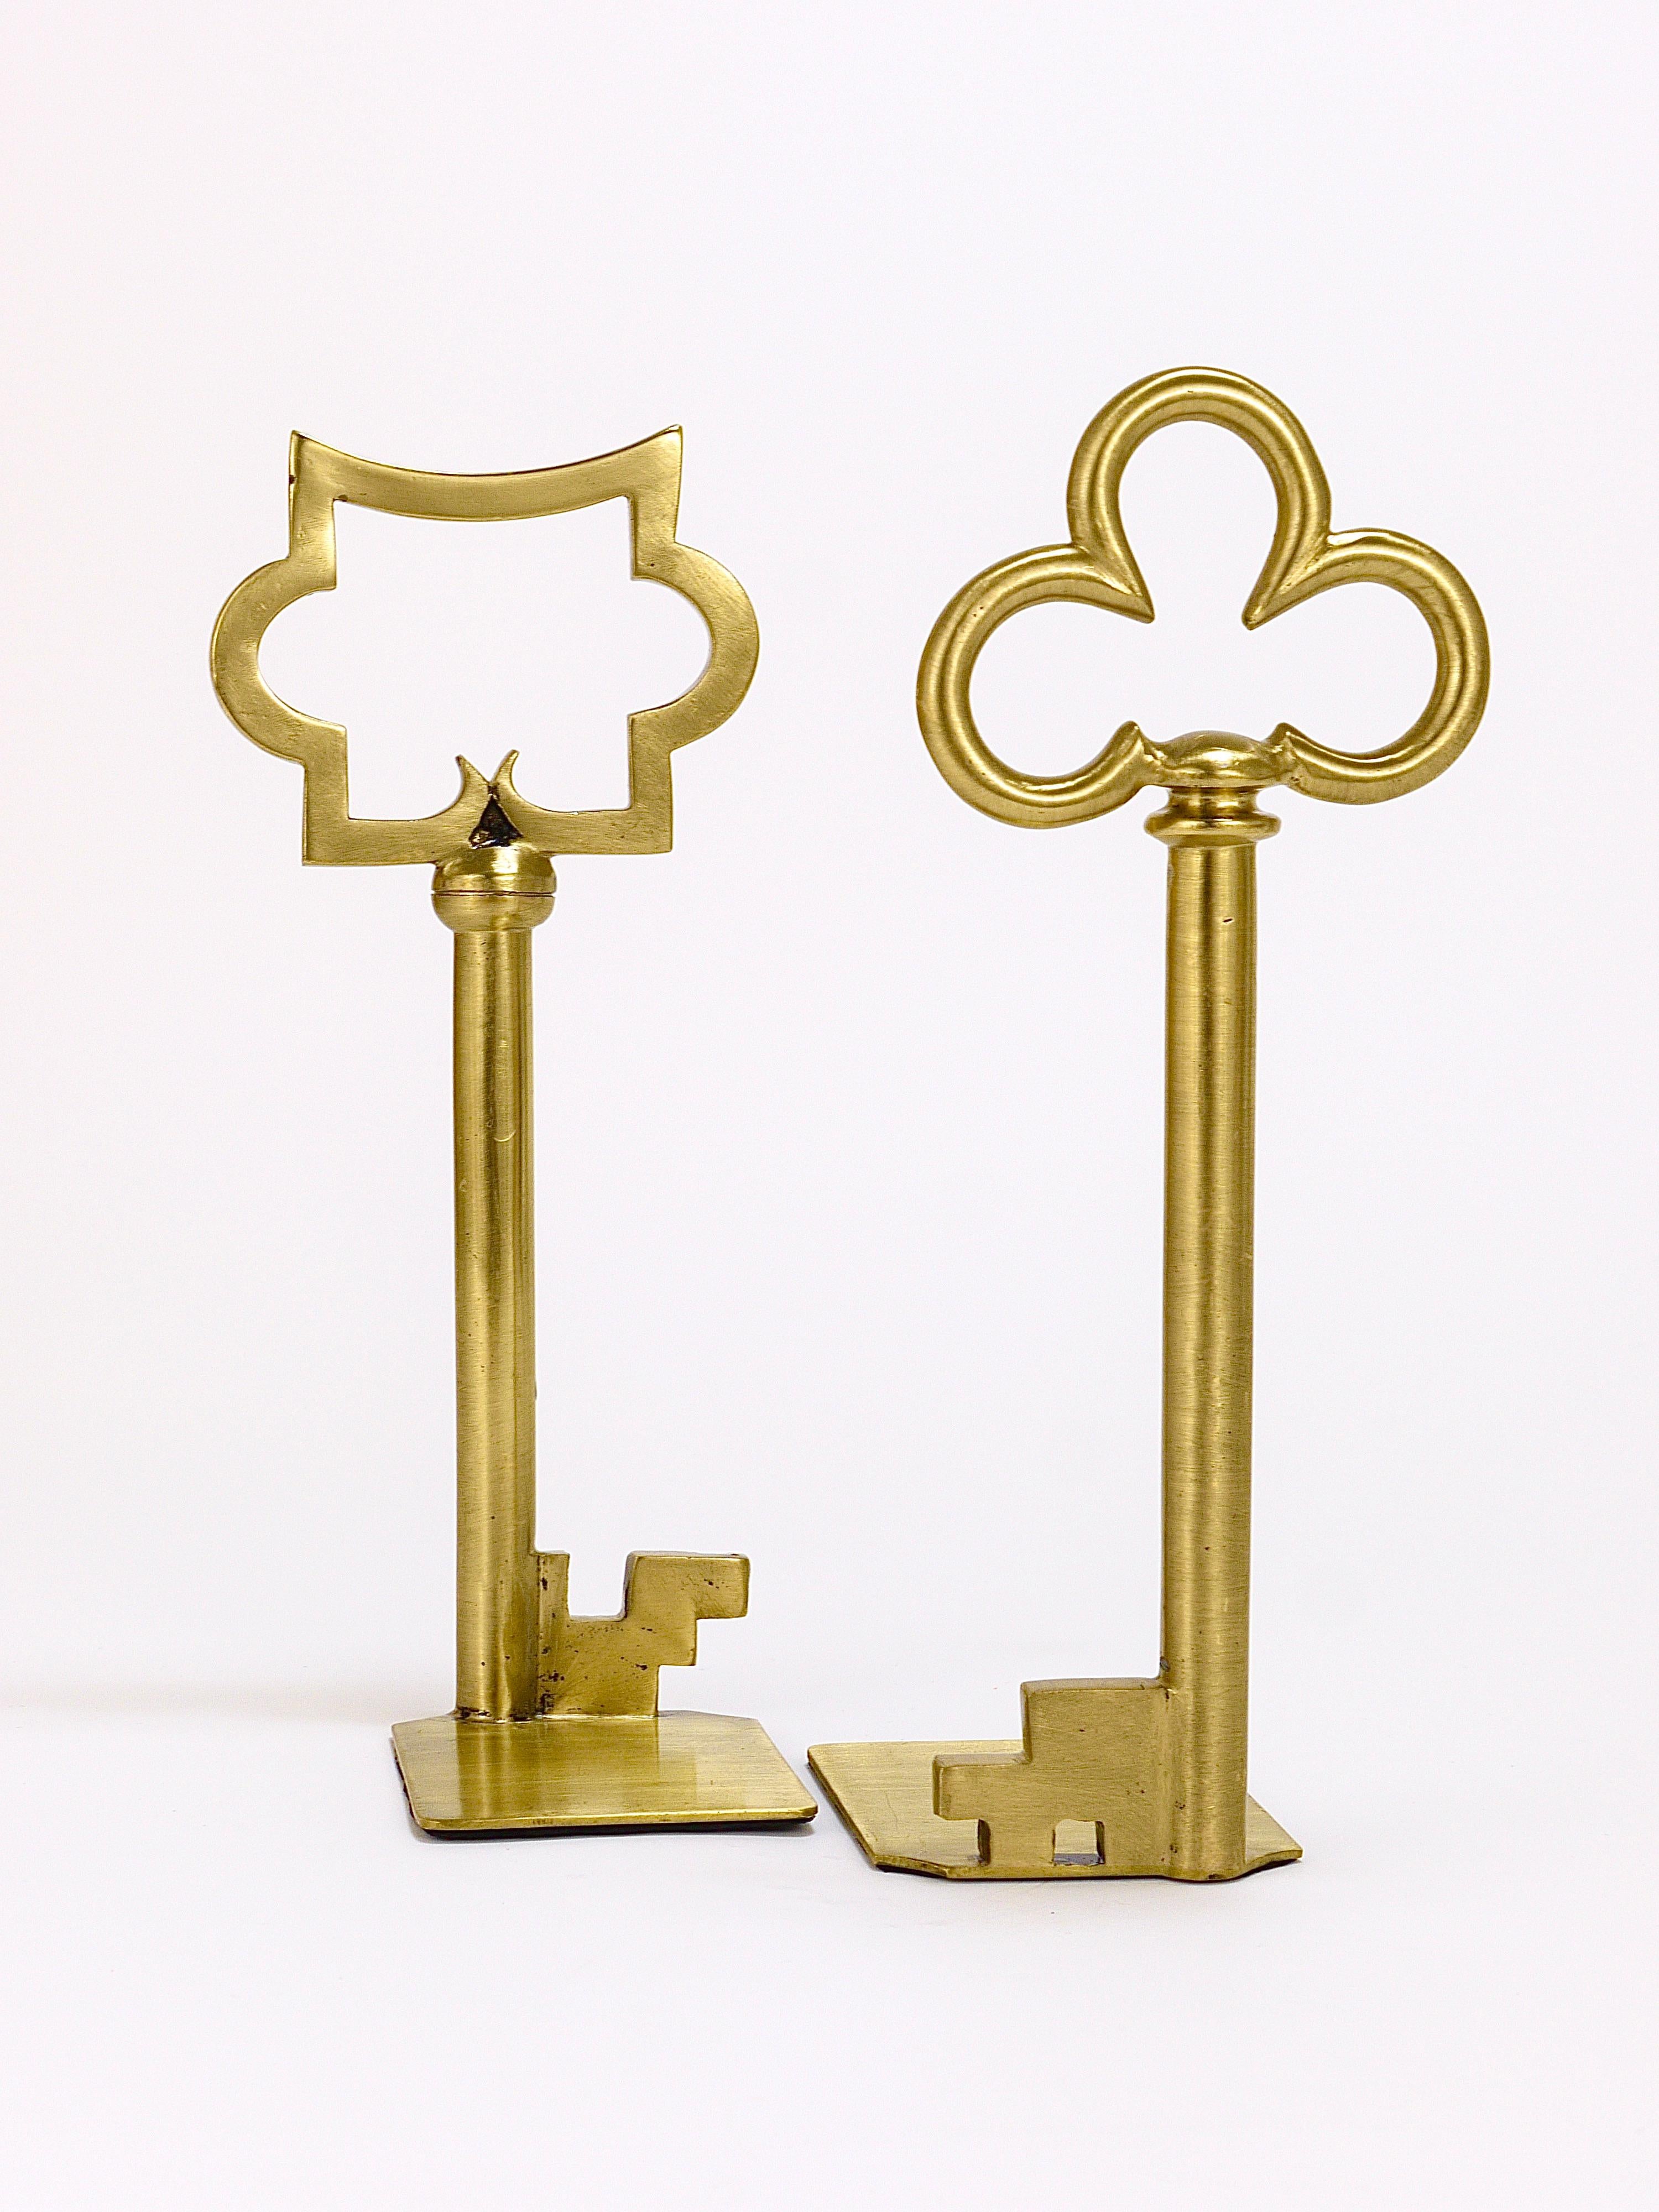 Sculptural Austrian Midcentury Brass Key Book Ends from the, 1950s In Good Condition For Sale In Vienna, AT